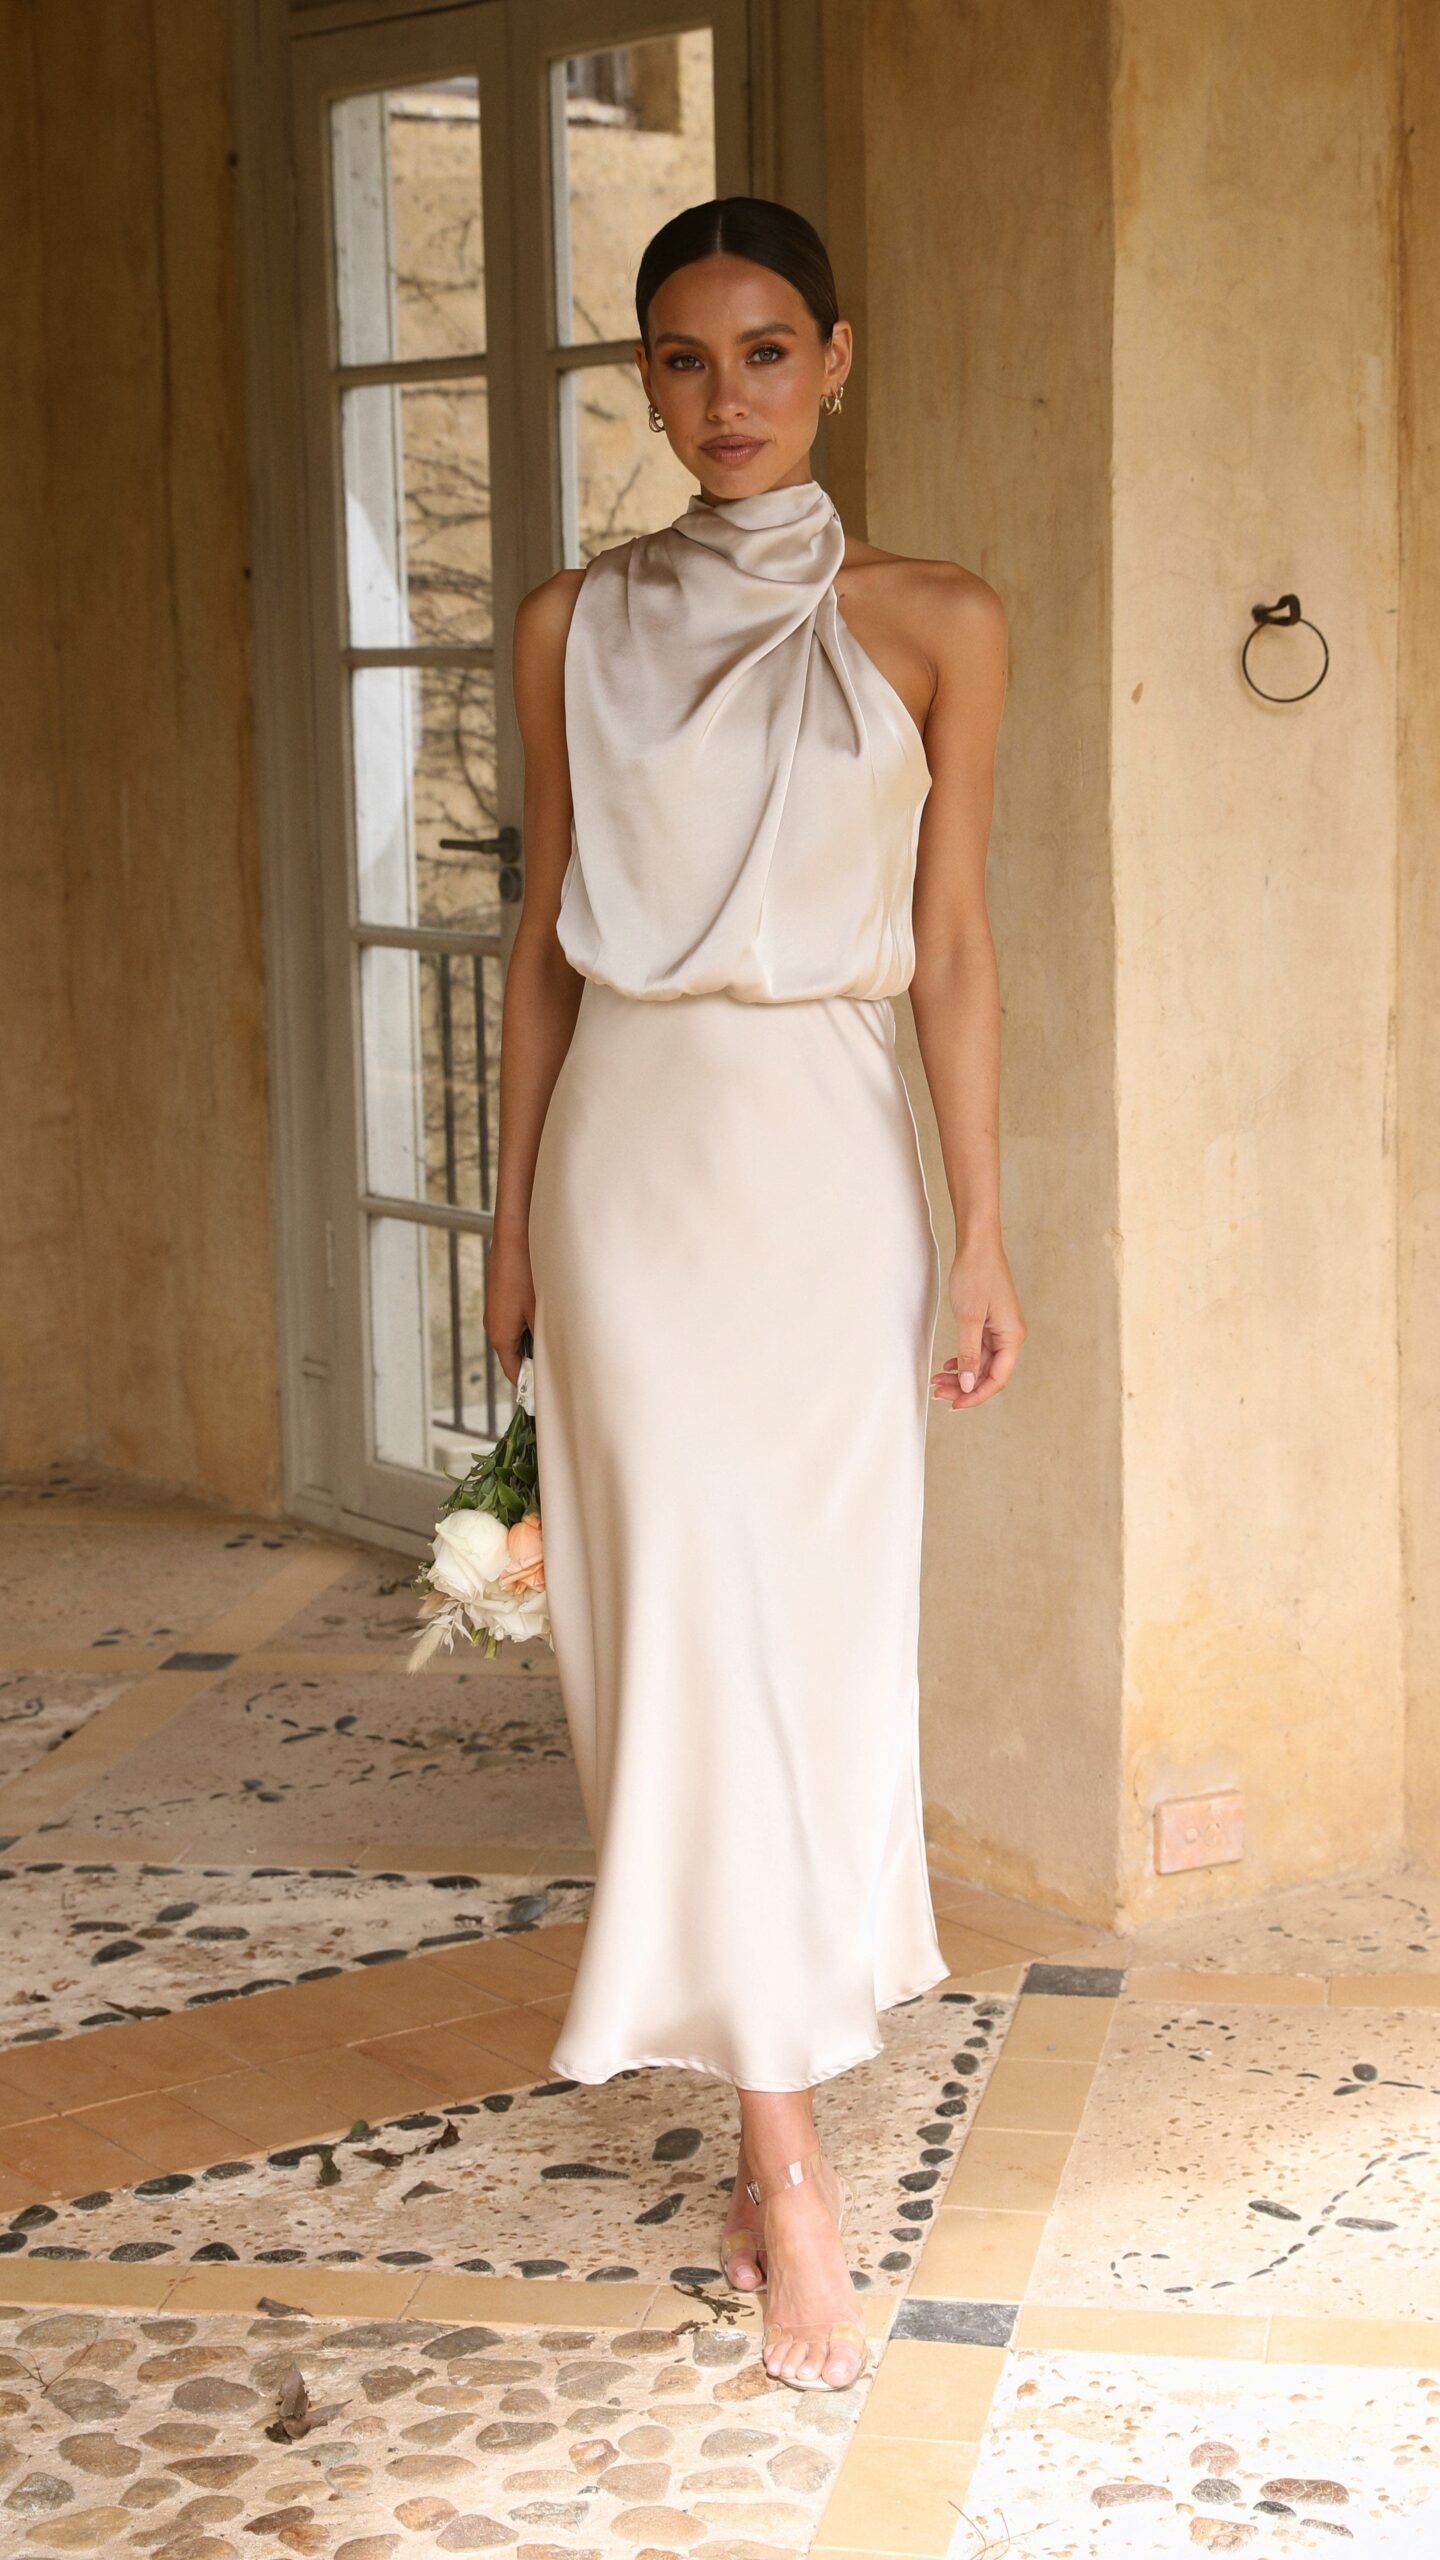 Look exquisite with maxi dresses for
weddings